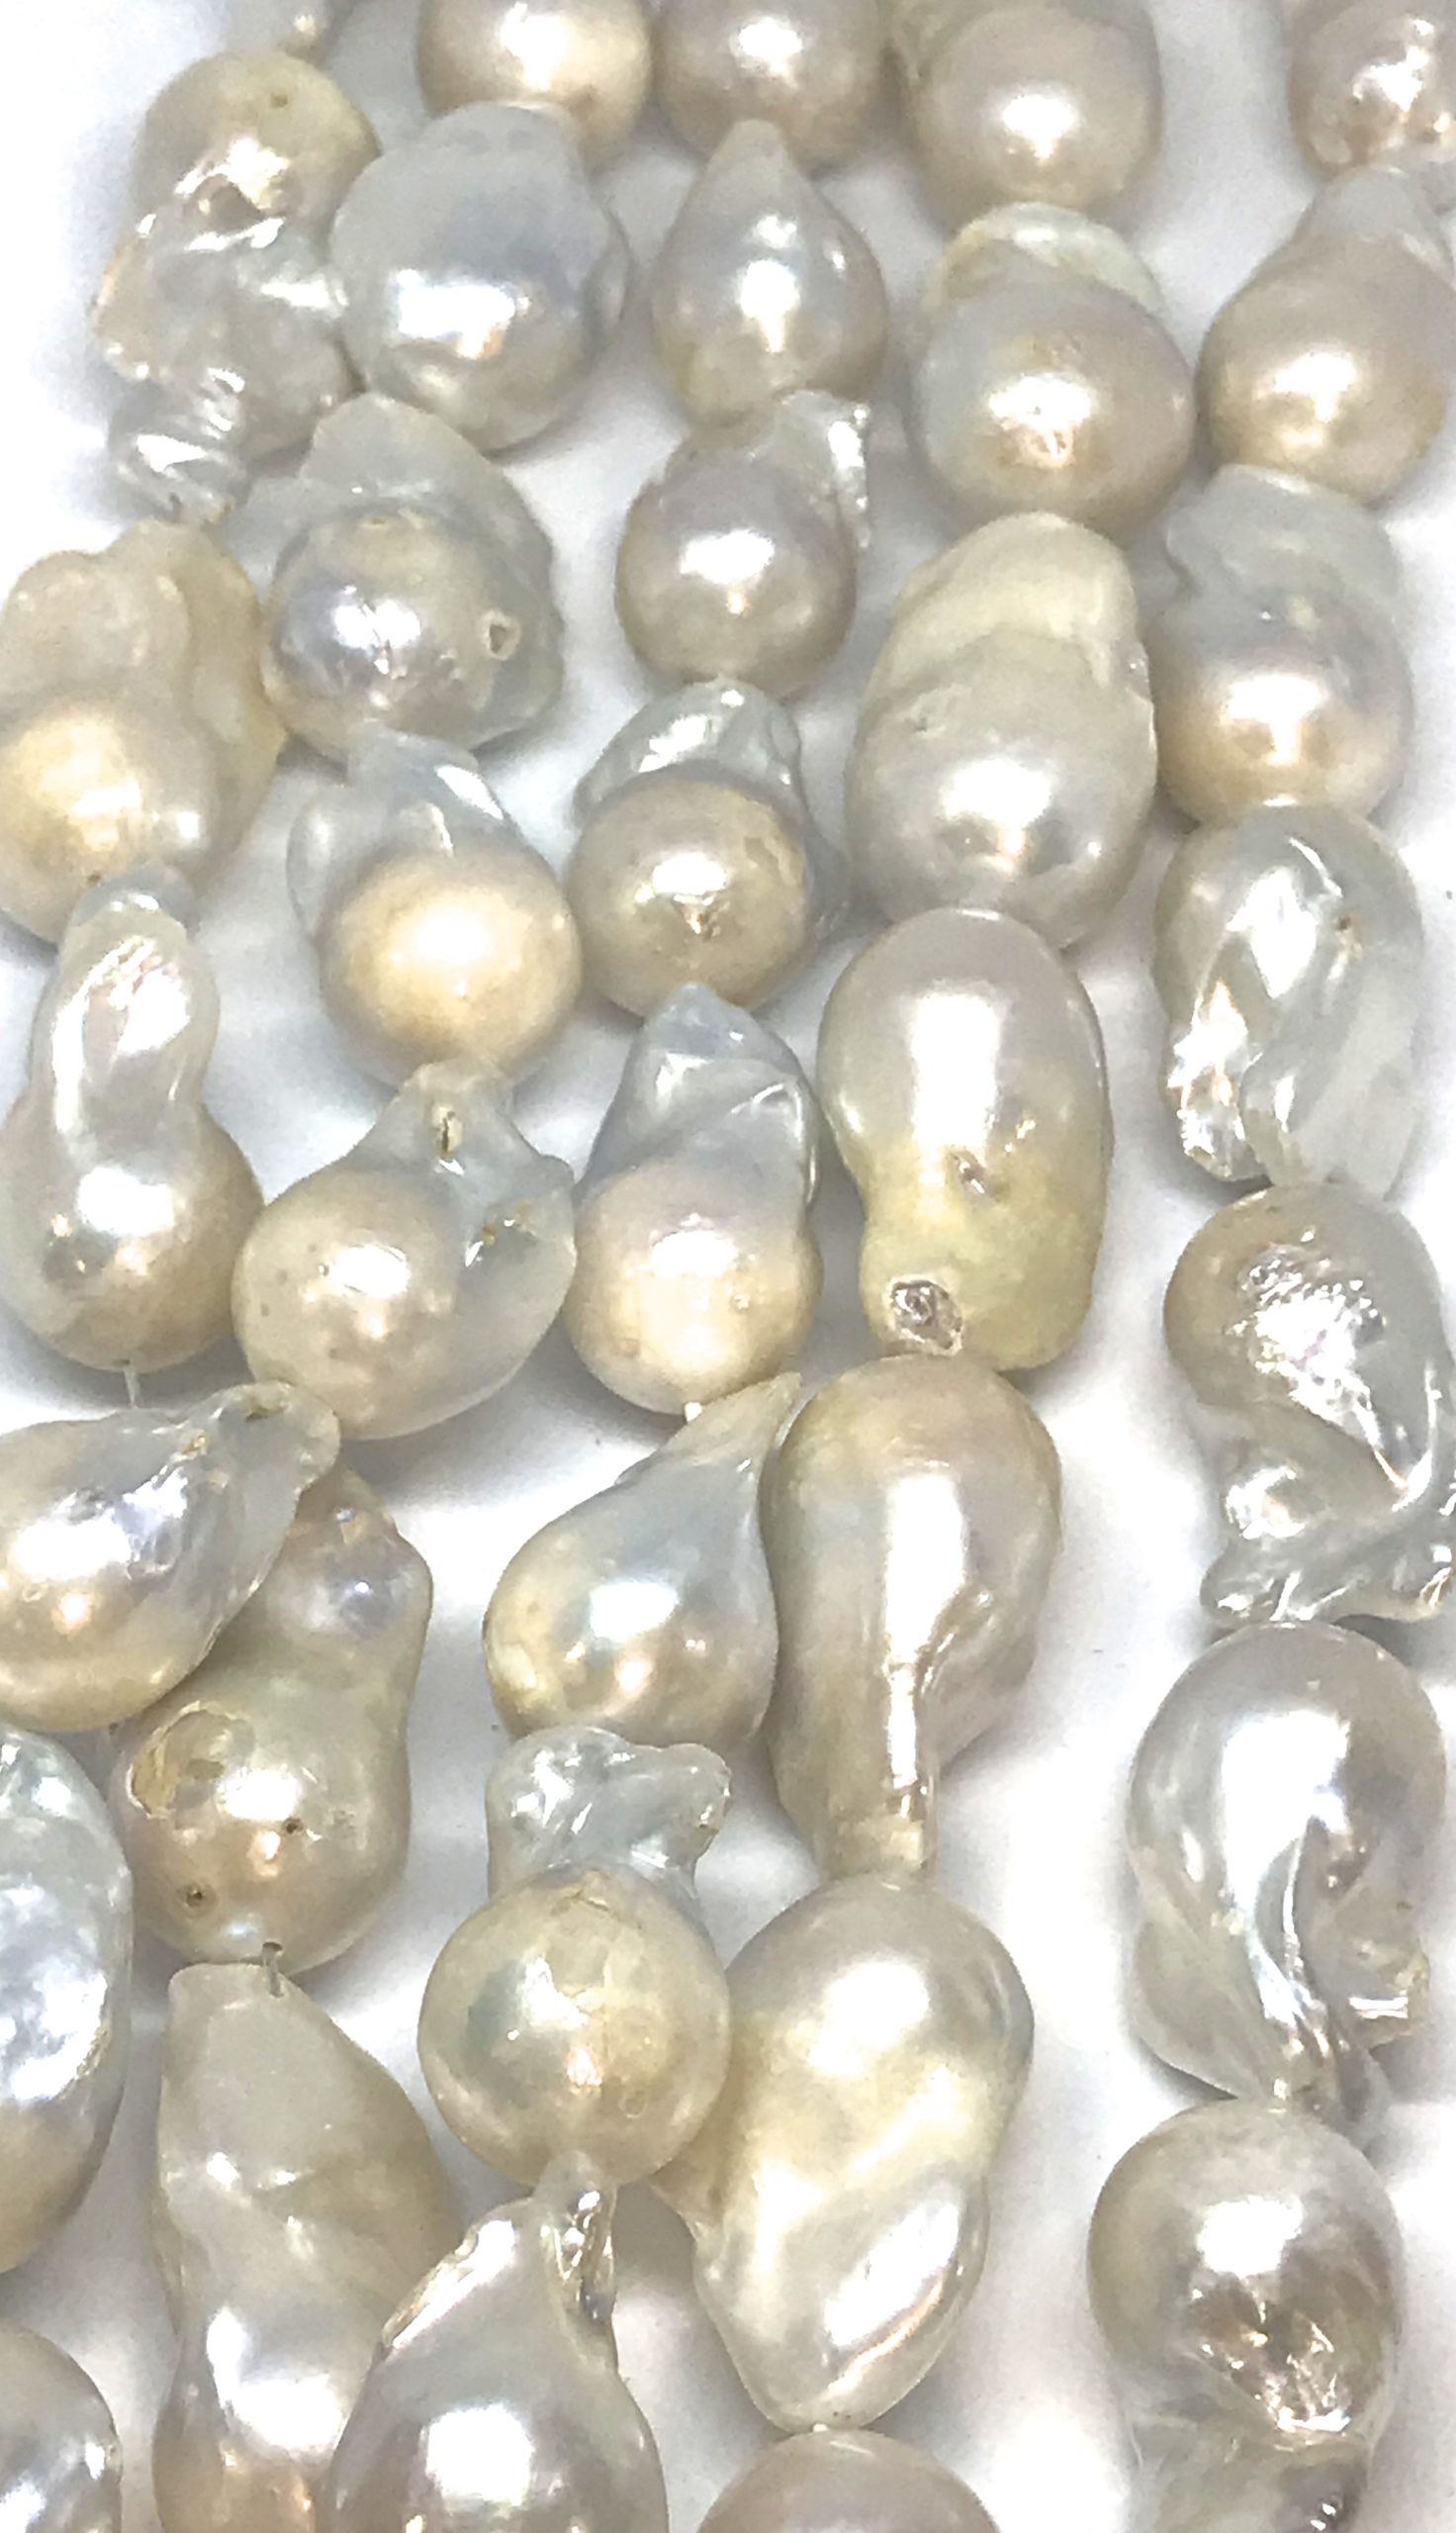 Unique and Natural Baroque Pearl Strand - Sizes 14-25mm